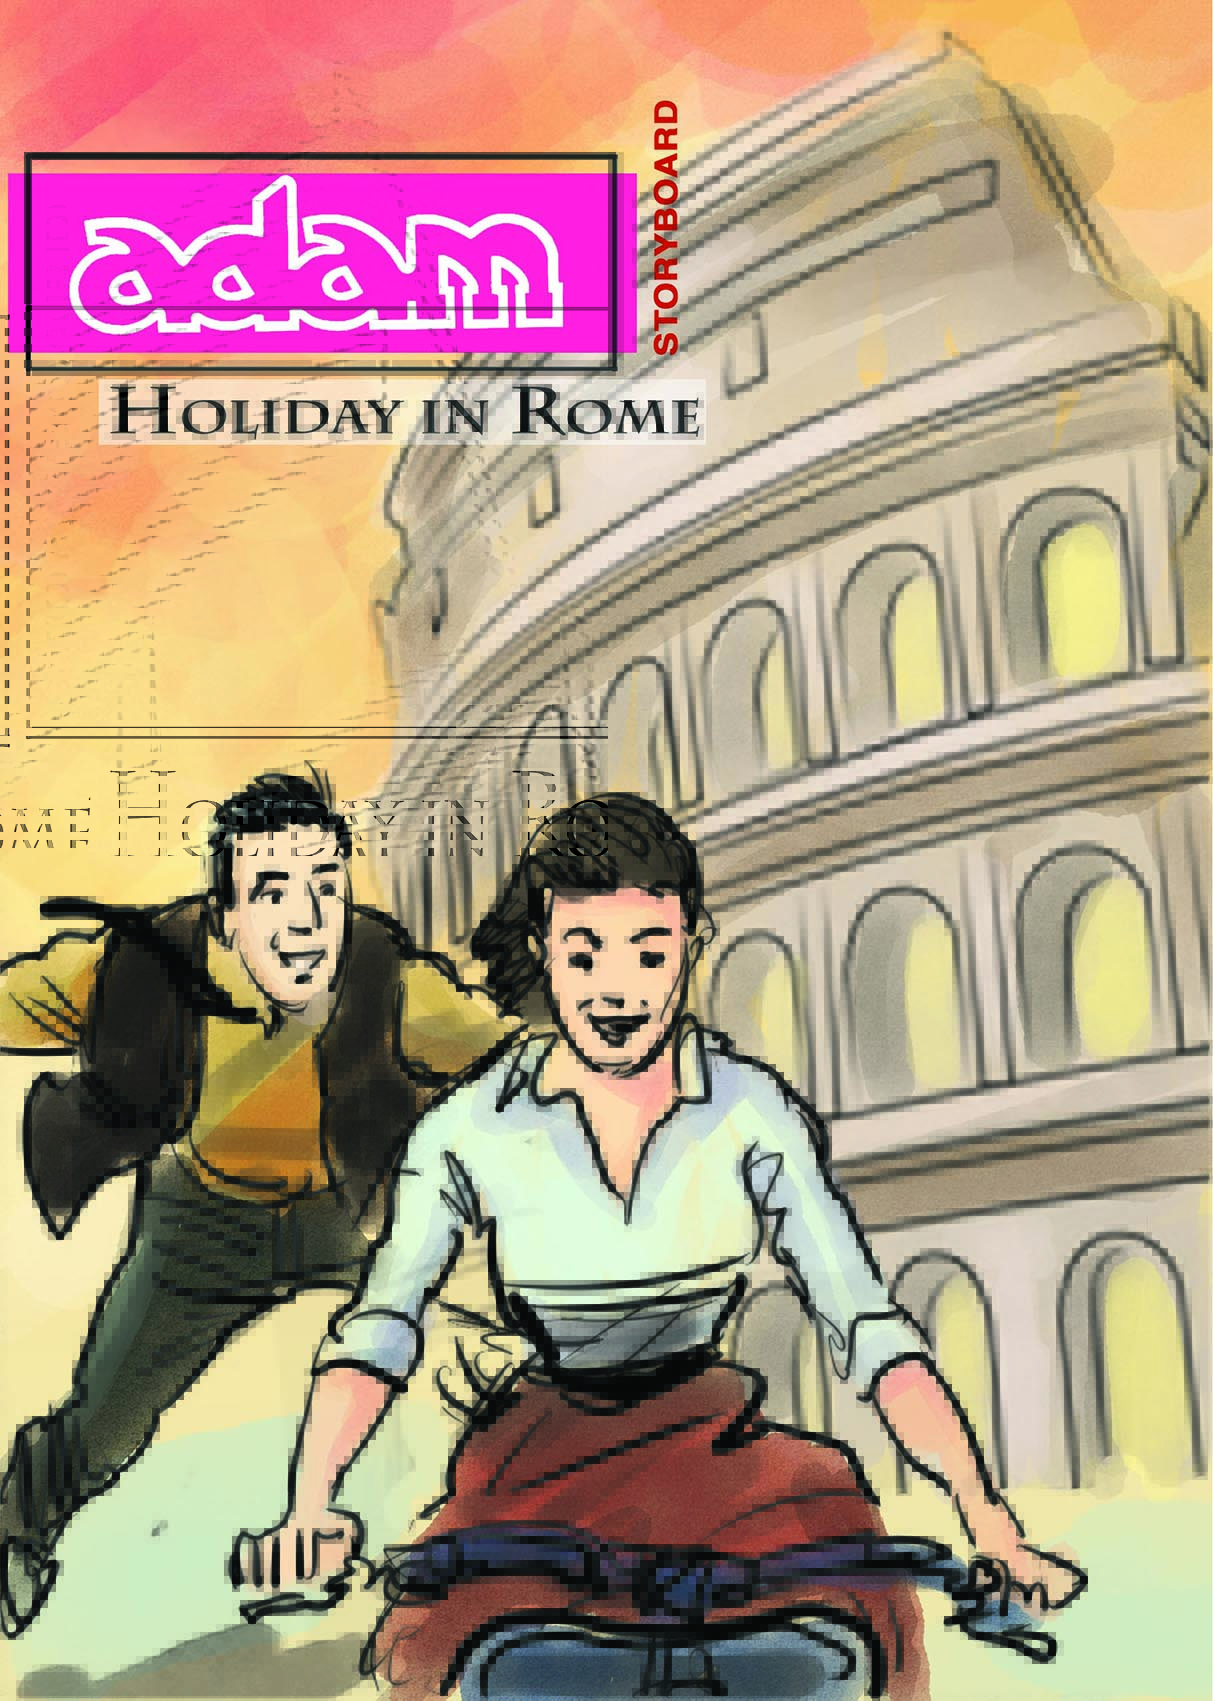 OutisFumetti LuccaComics – 4  Adam Holiday in Rome